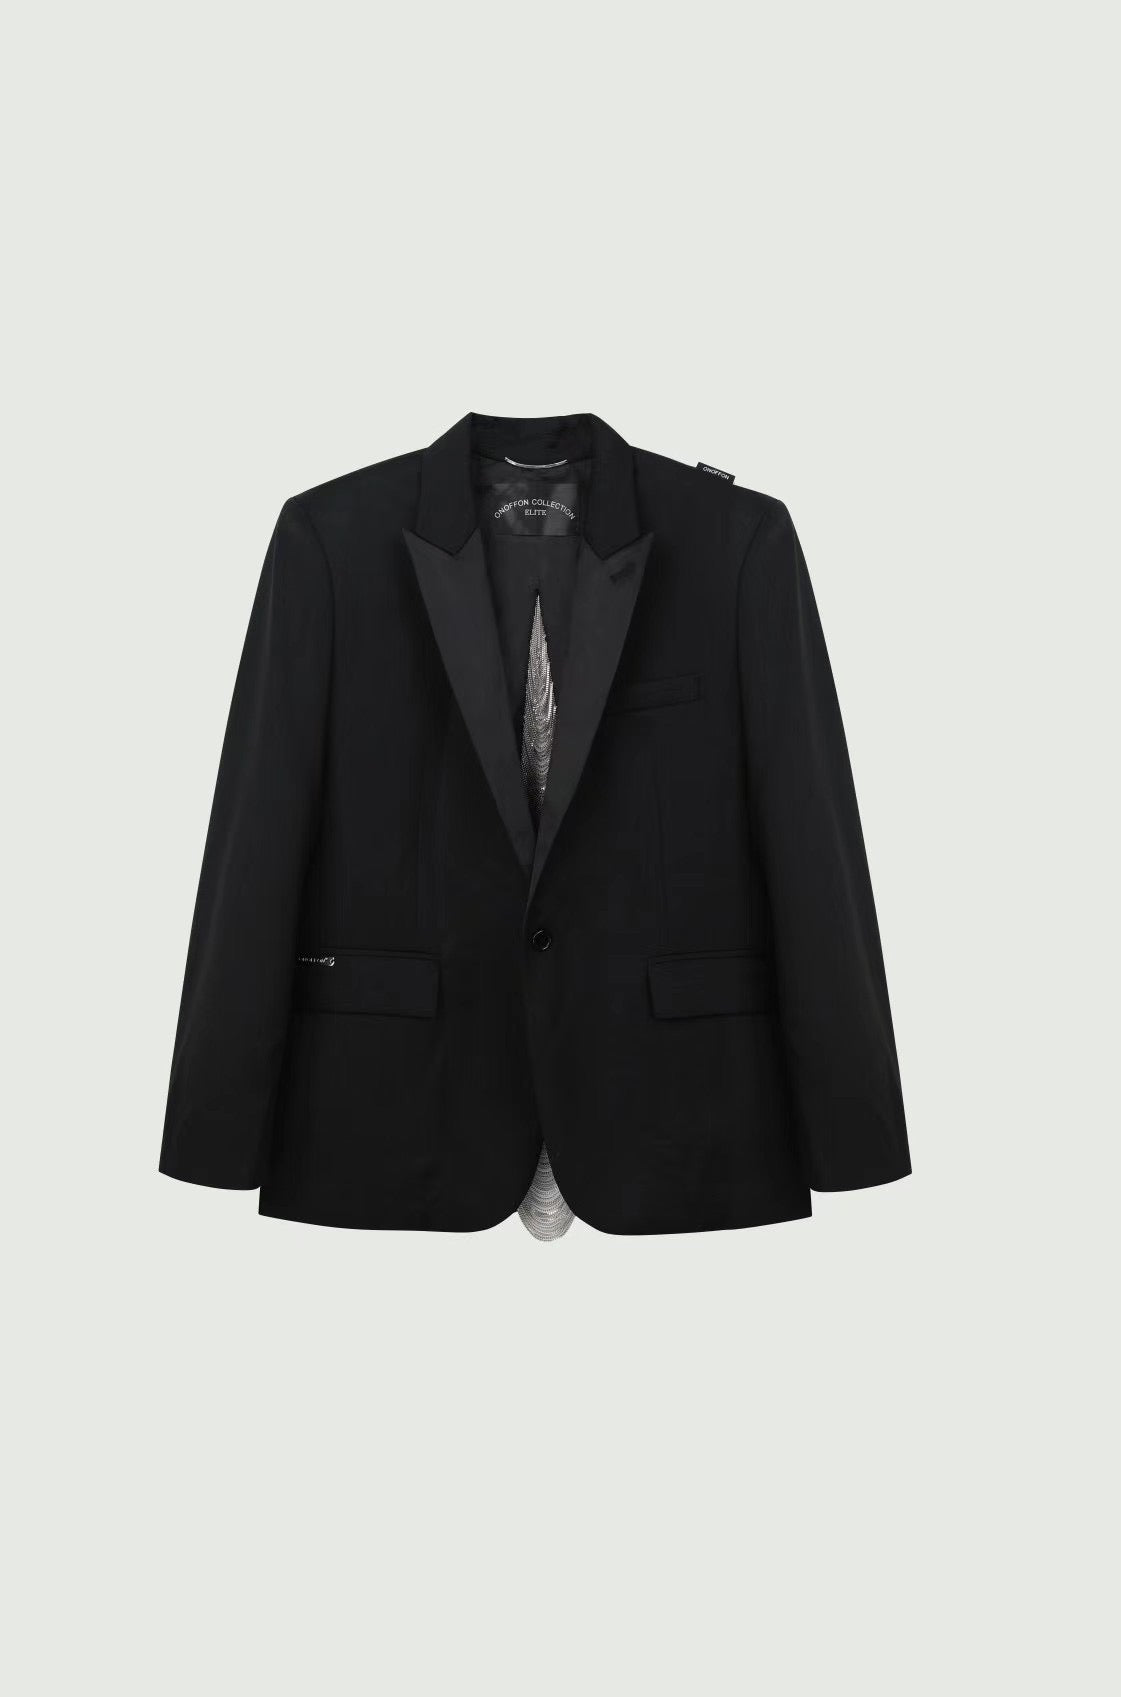 Black Chain Back Suit Jacket, Same as Sha Yiting's Style